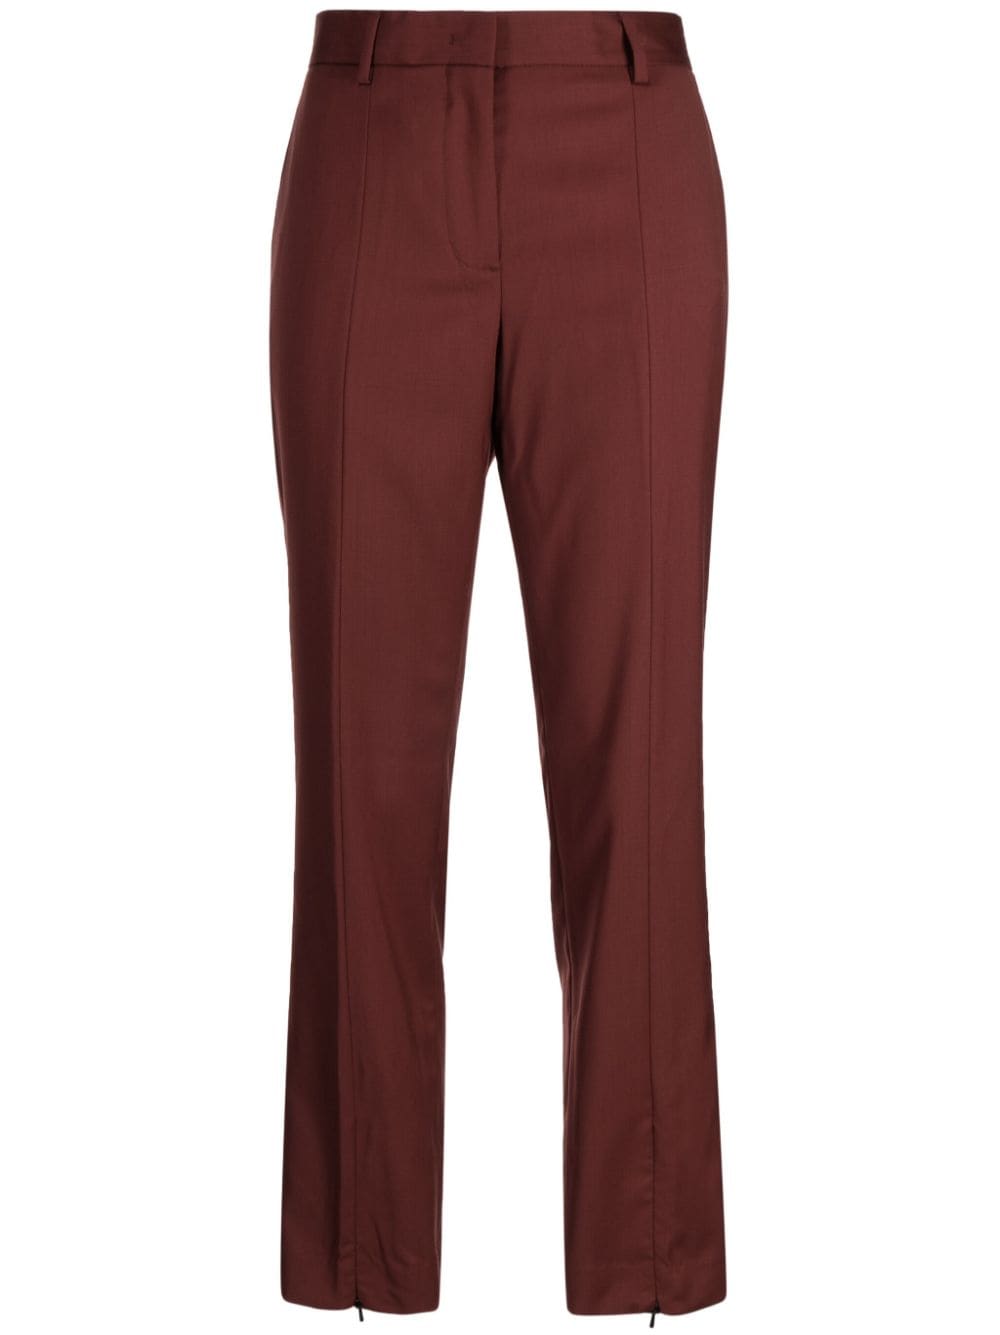 Paul Smith pleat-detailing wool tapered trousers von Paul Smith